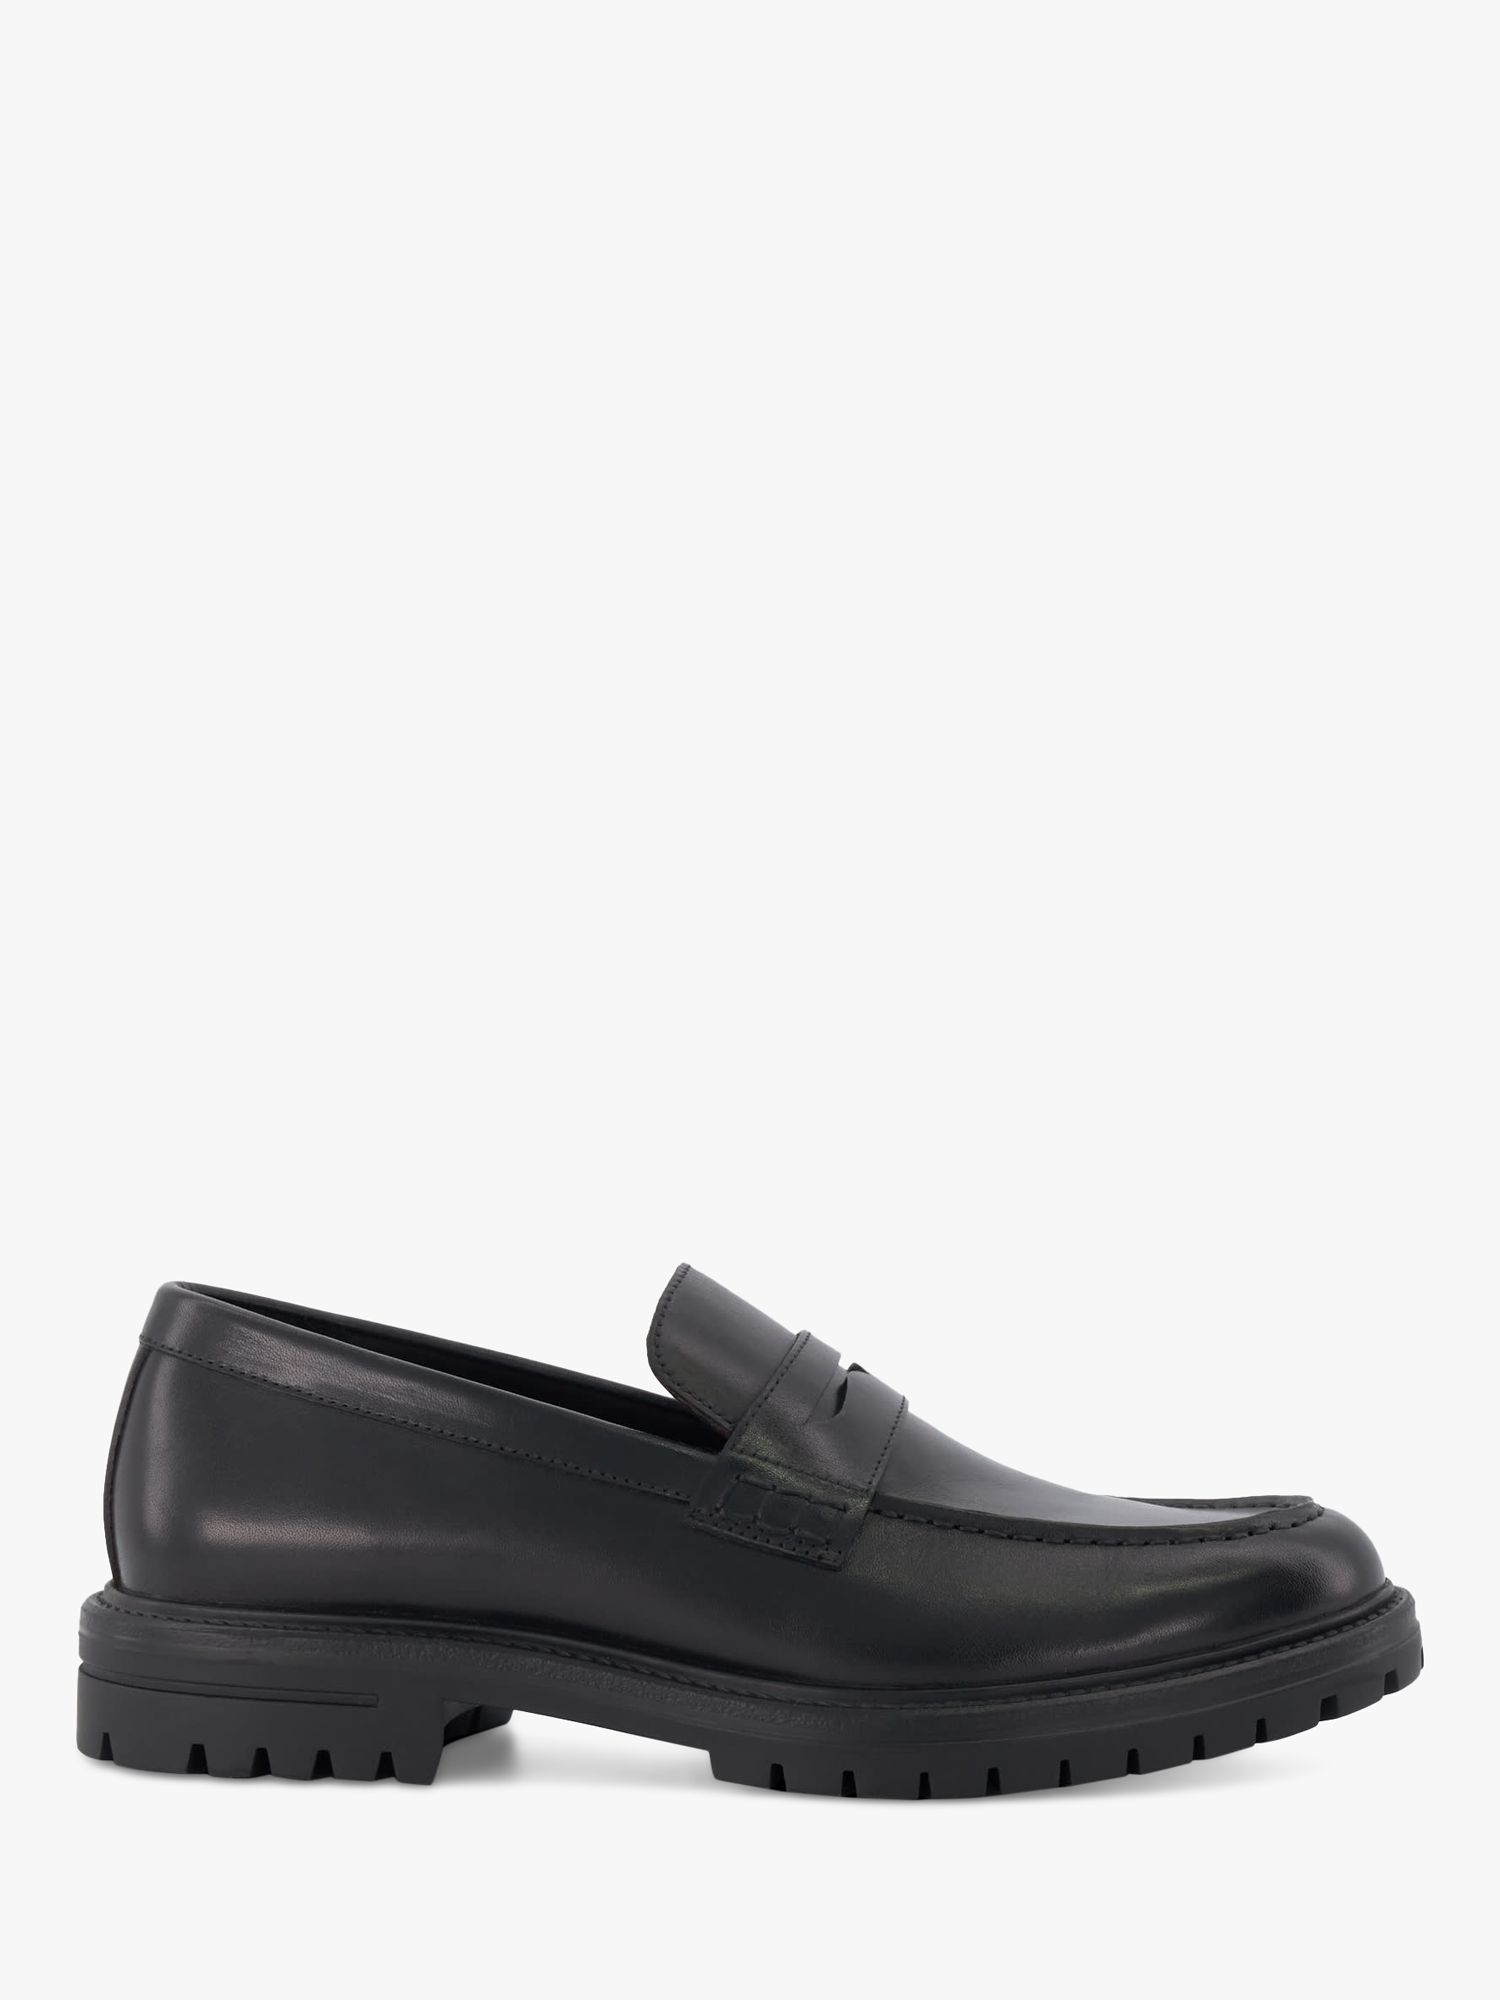 Dune Banking Cleated Sole Penny Loafers, Black at John Lewis & Partners